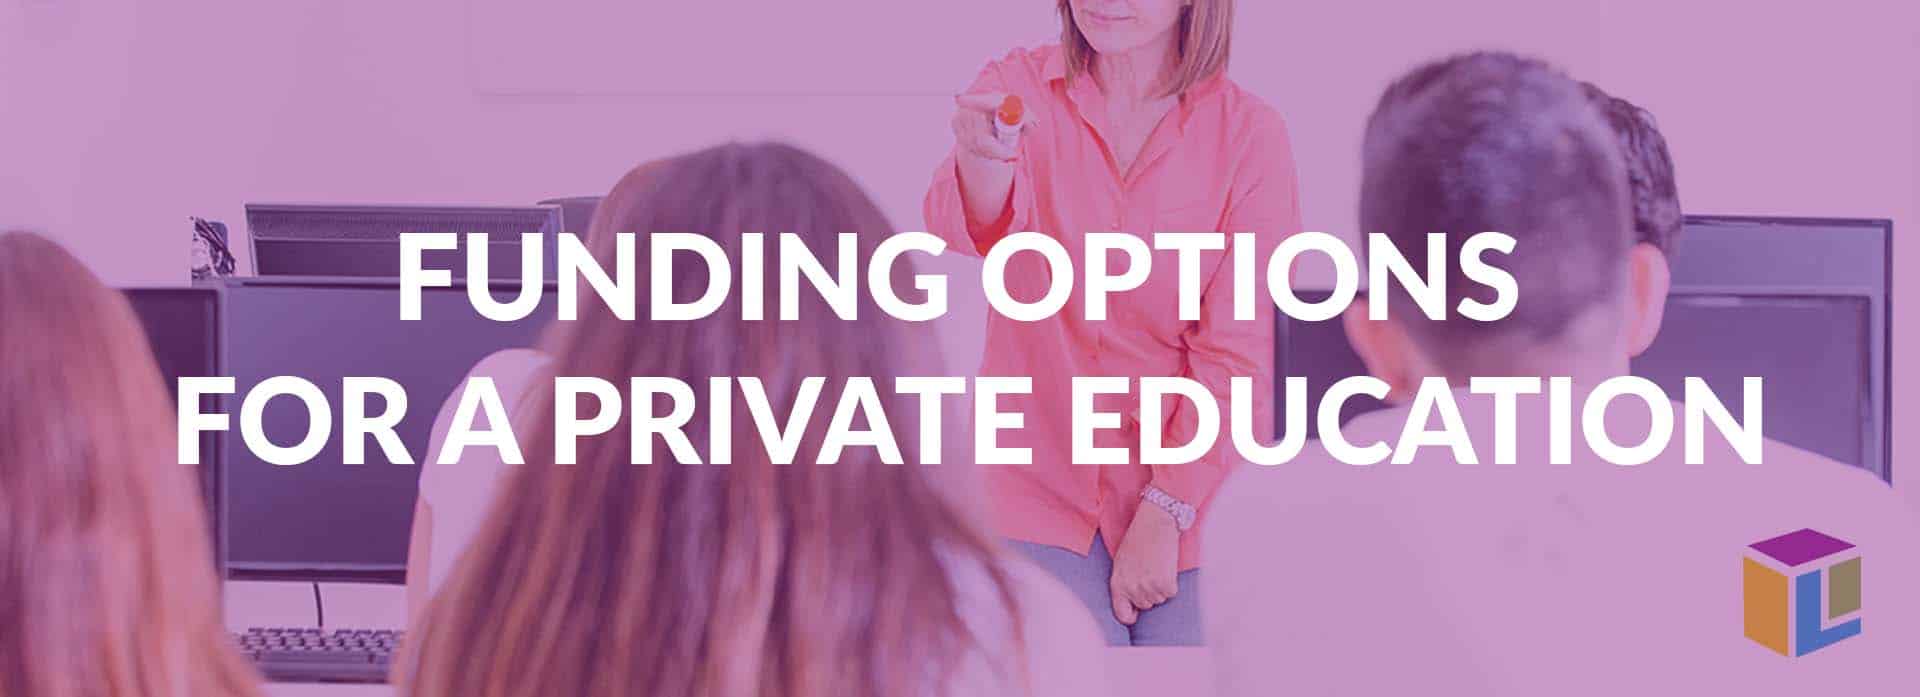 Funding Options For A Private Education